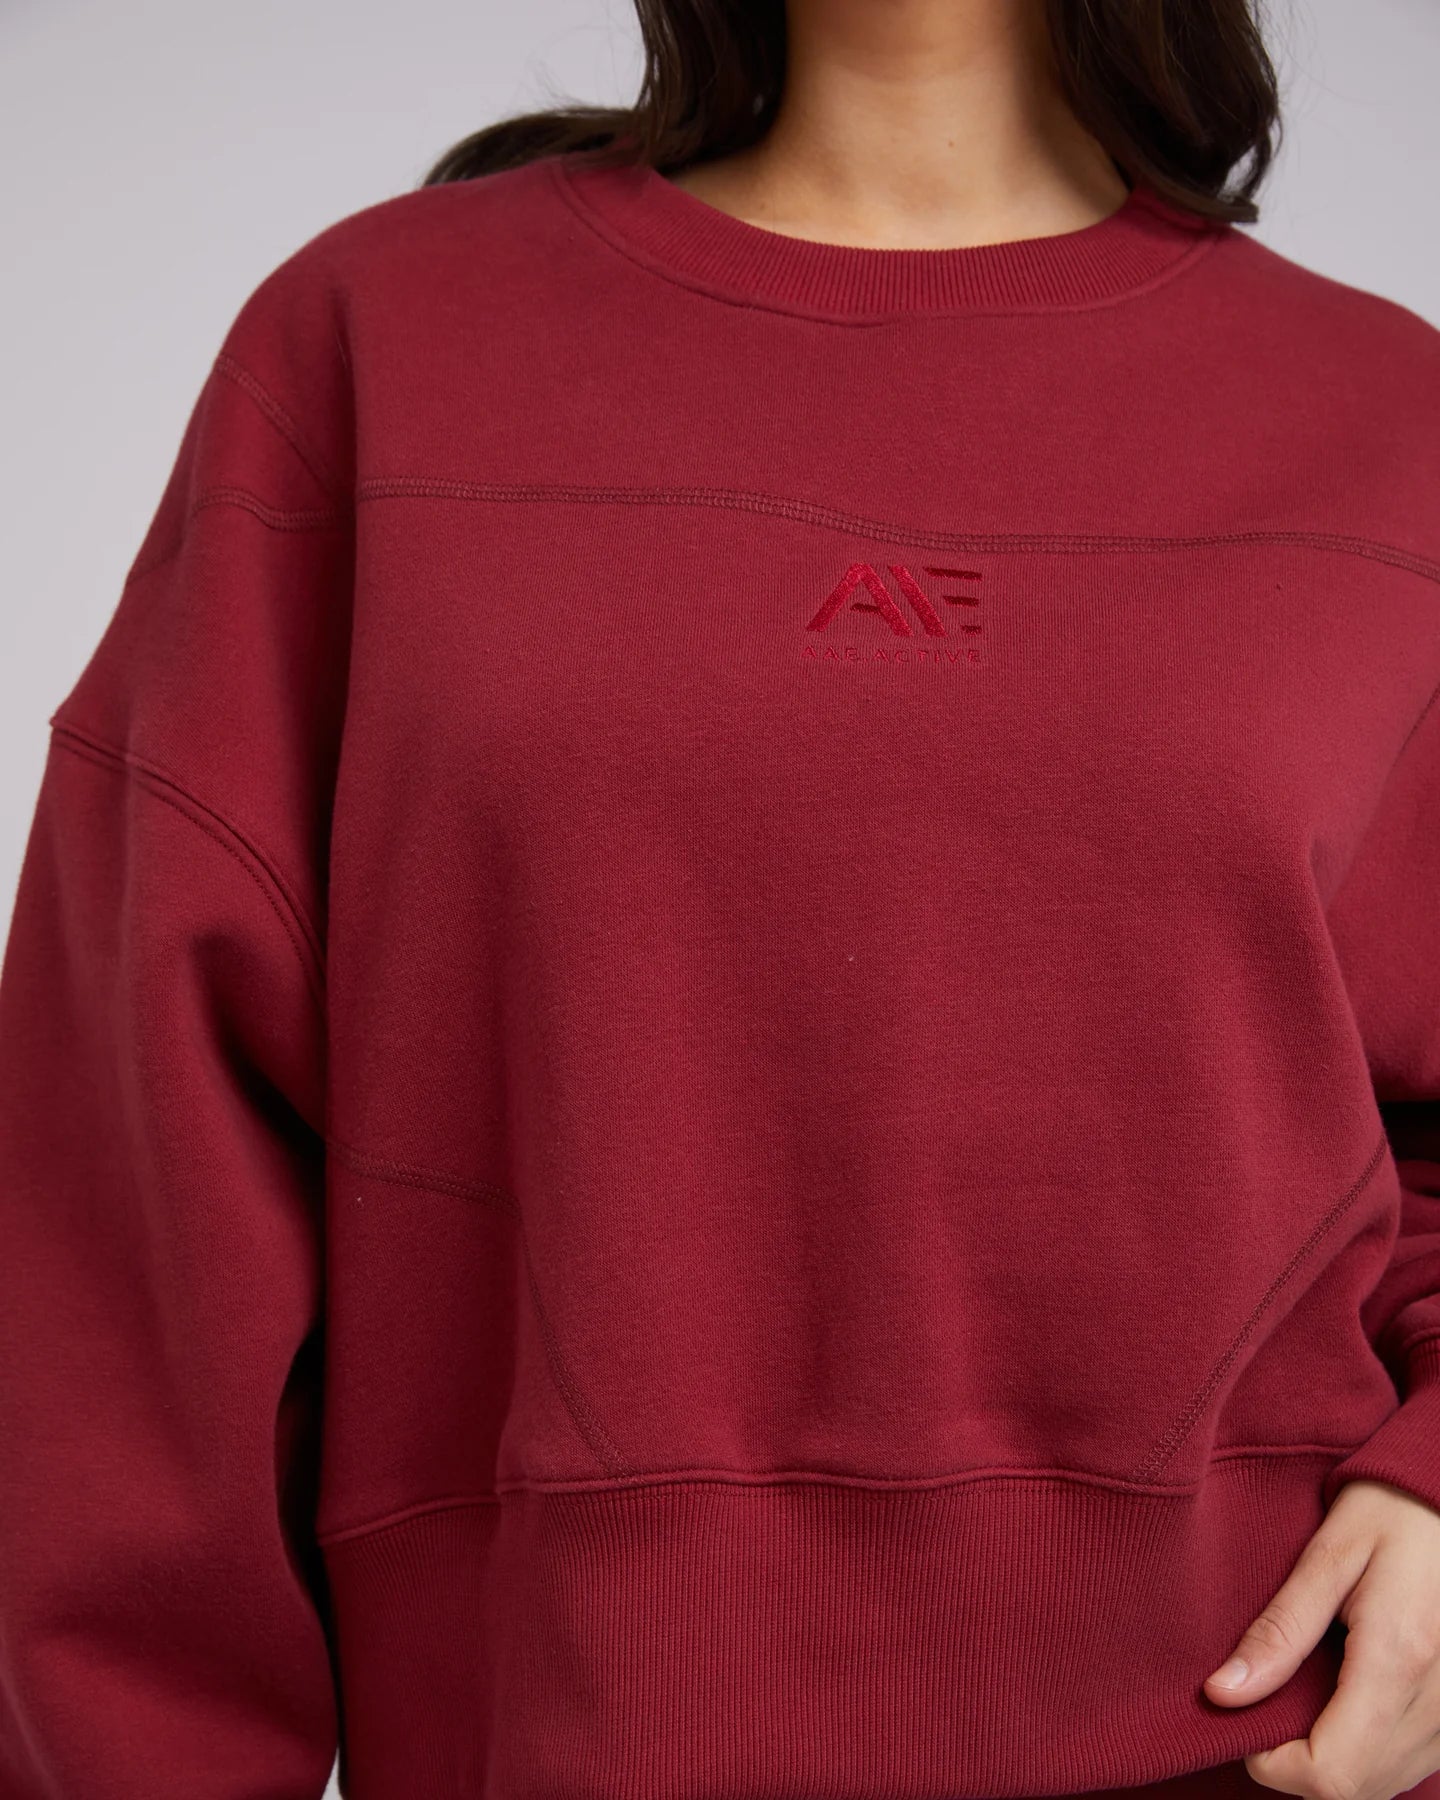 ALL ABOUT EVE ACTIVE TONAL SWEATER PORT